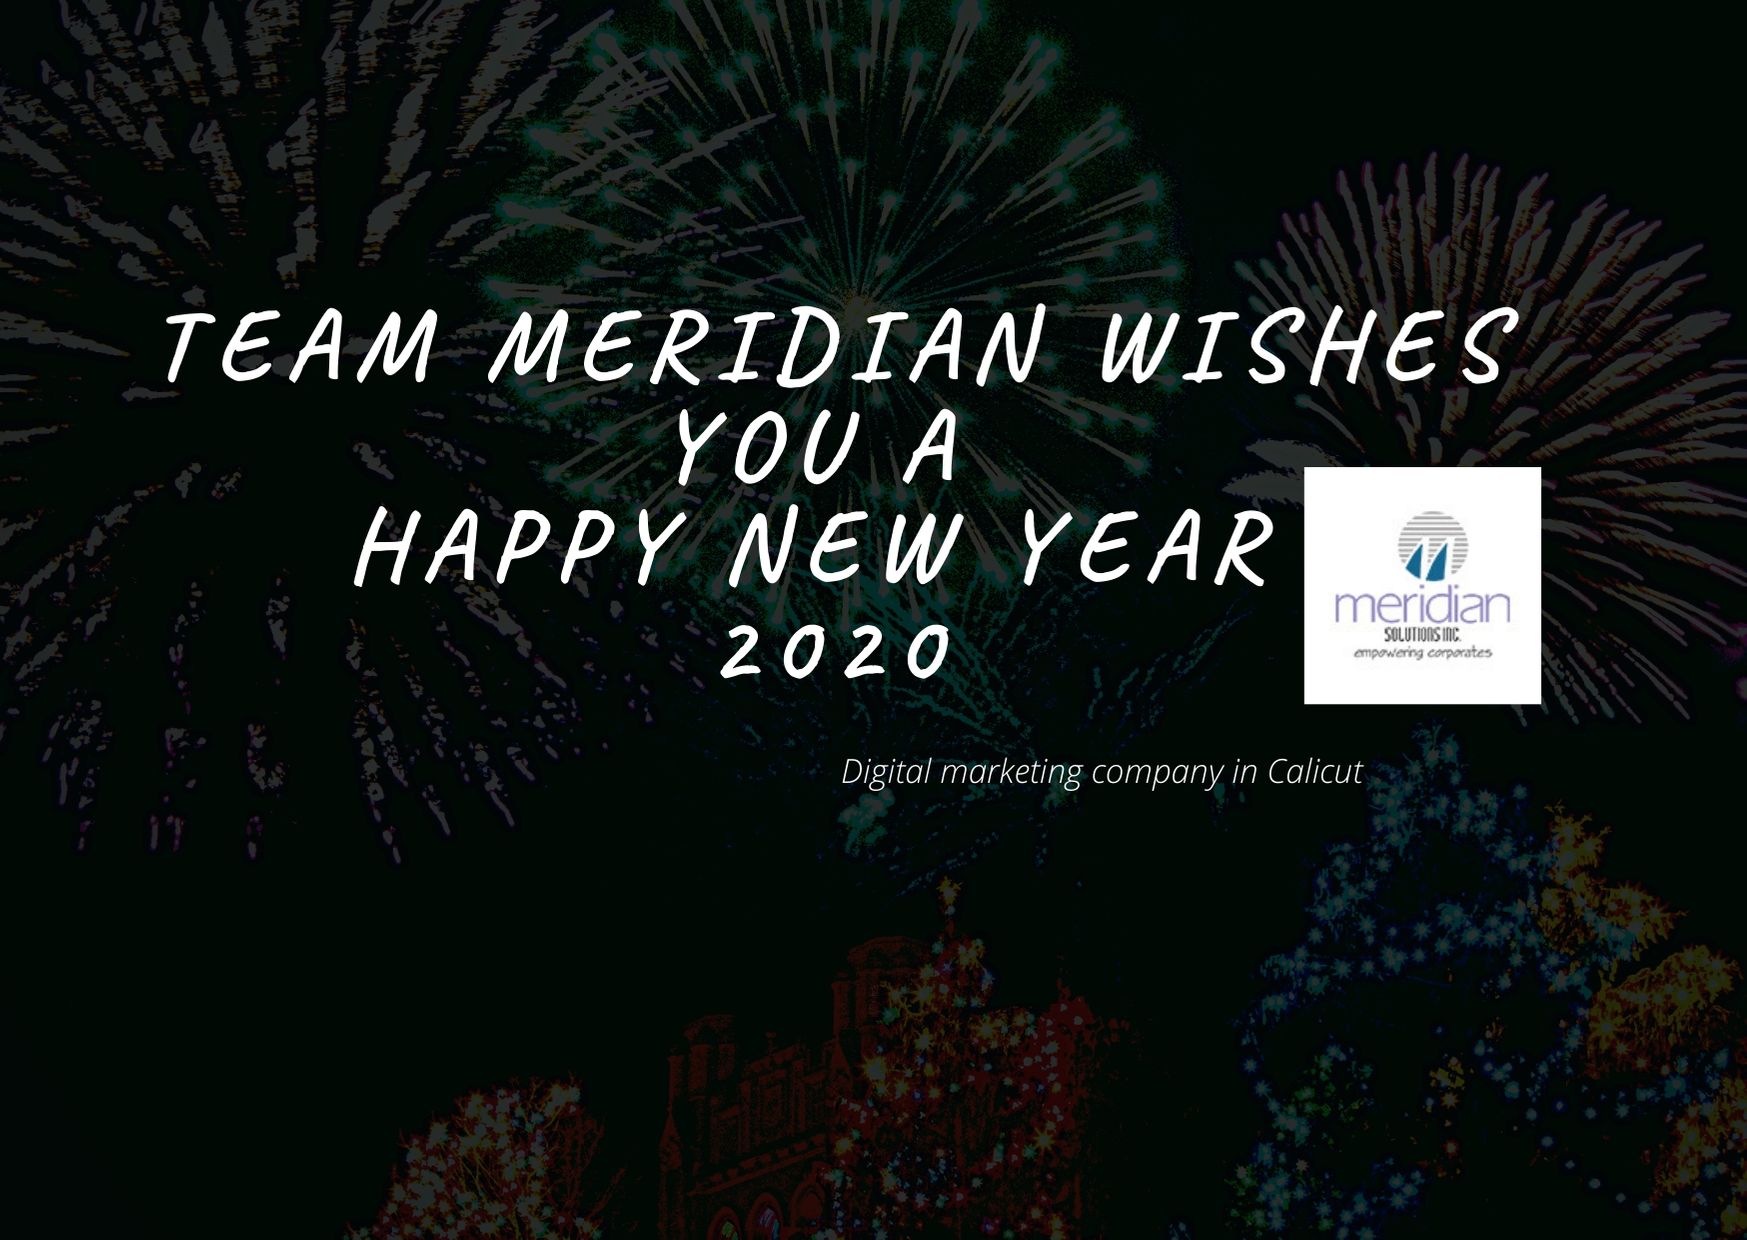 Happy New Year Wishes From Meridian